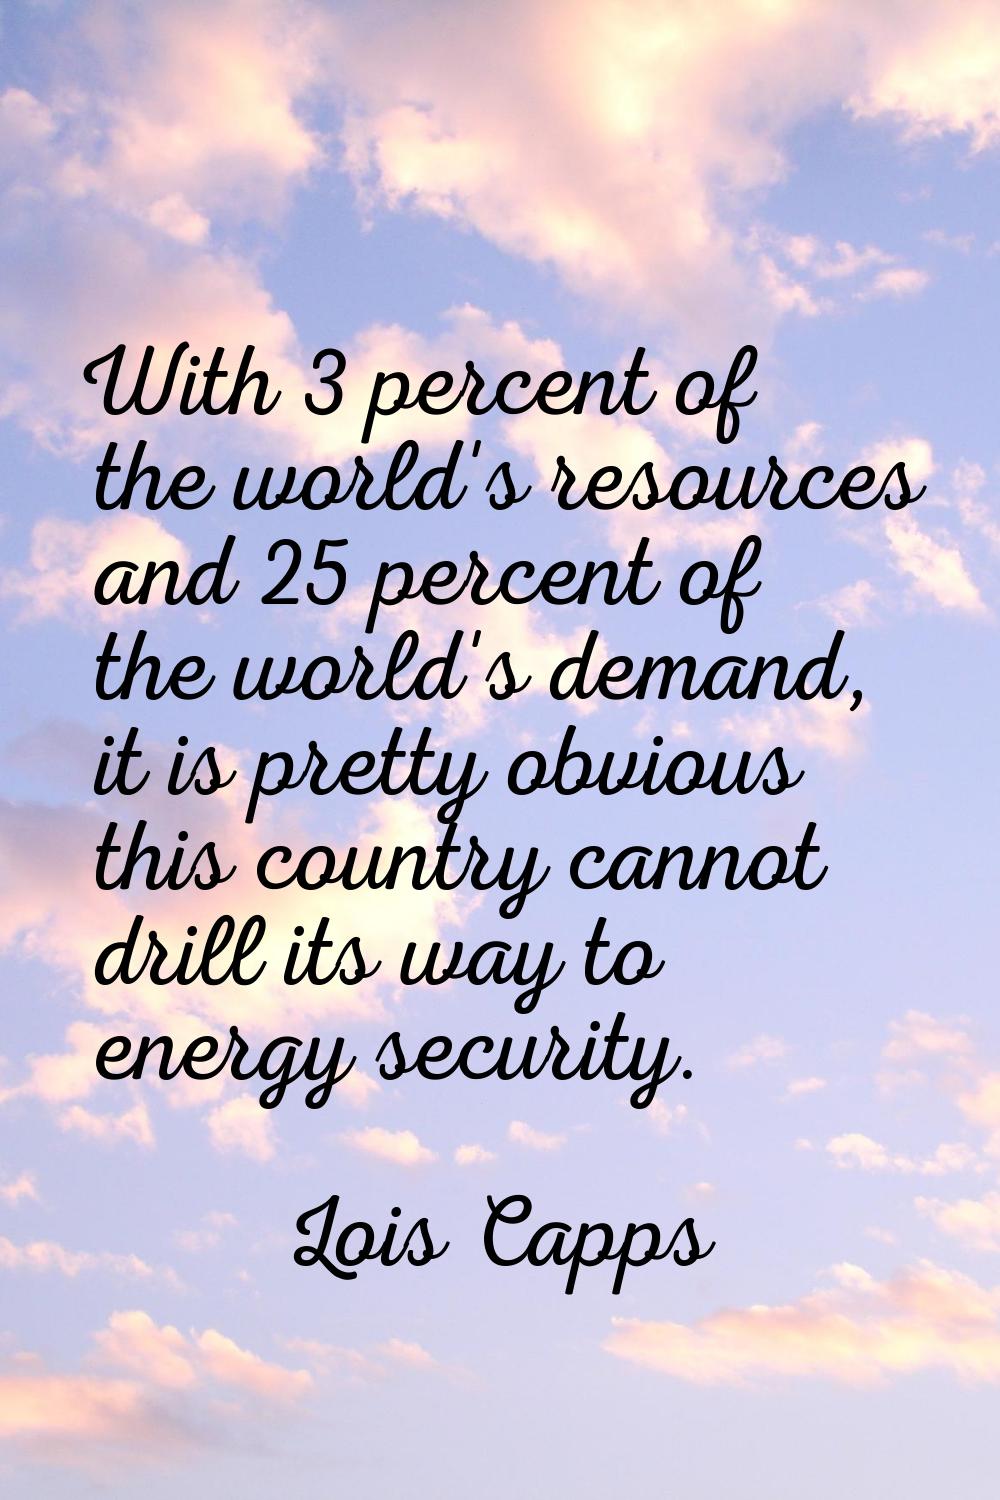 With 3 percent of the world's resources and 25 percent of the world's demand, it is pretty obvious 